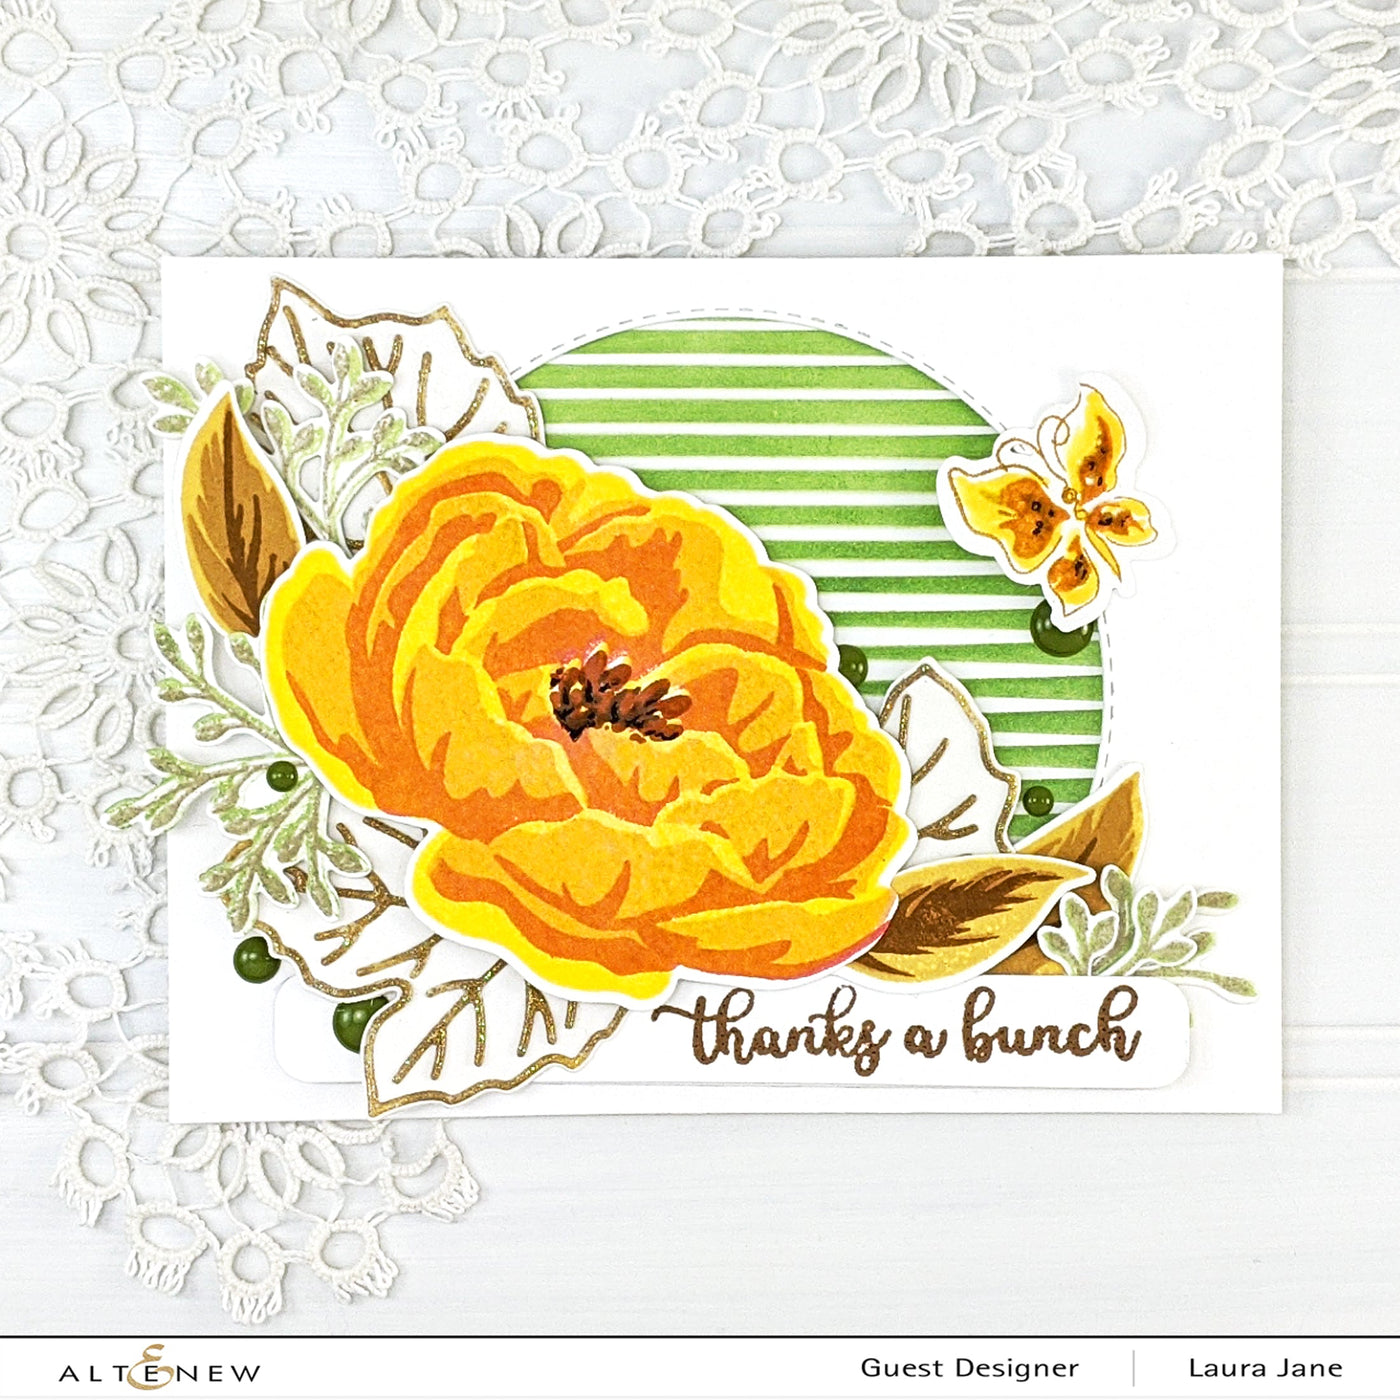 Build-A-Flower Set Build-A-Flower: Peony Layering Stamp & Die Set